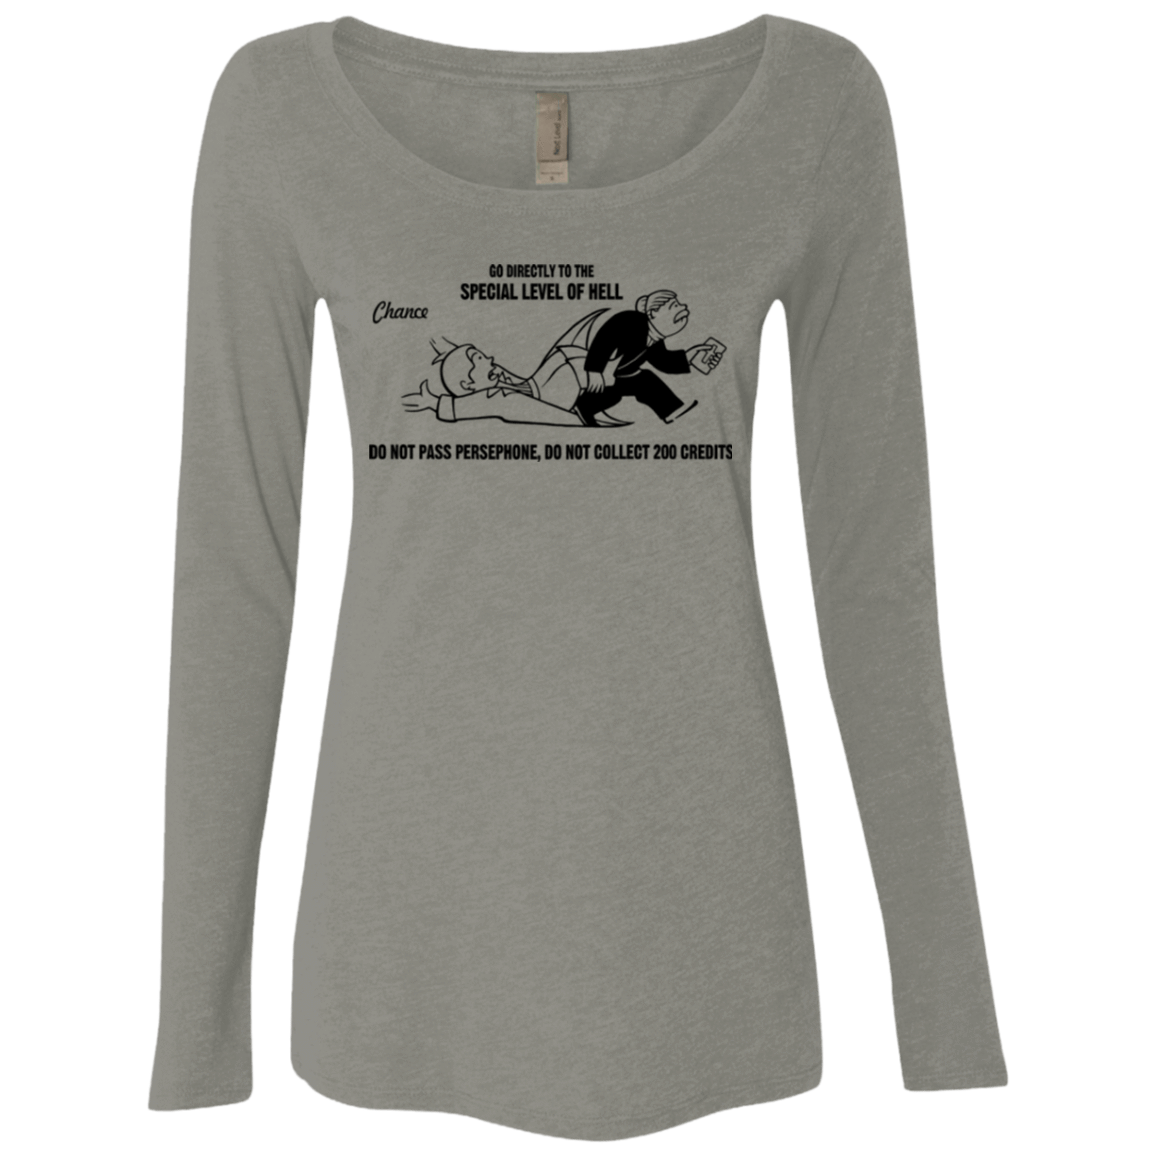 T-Shirts Venetian Grey / Small Special Level of Hell Women's Triblend Long Sleeve Shirt